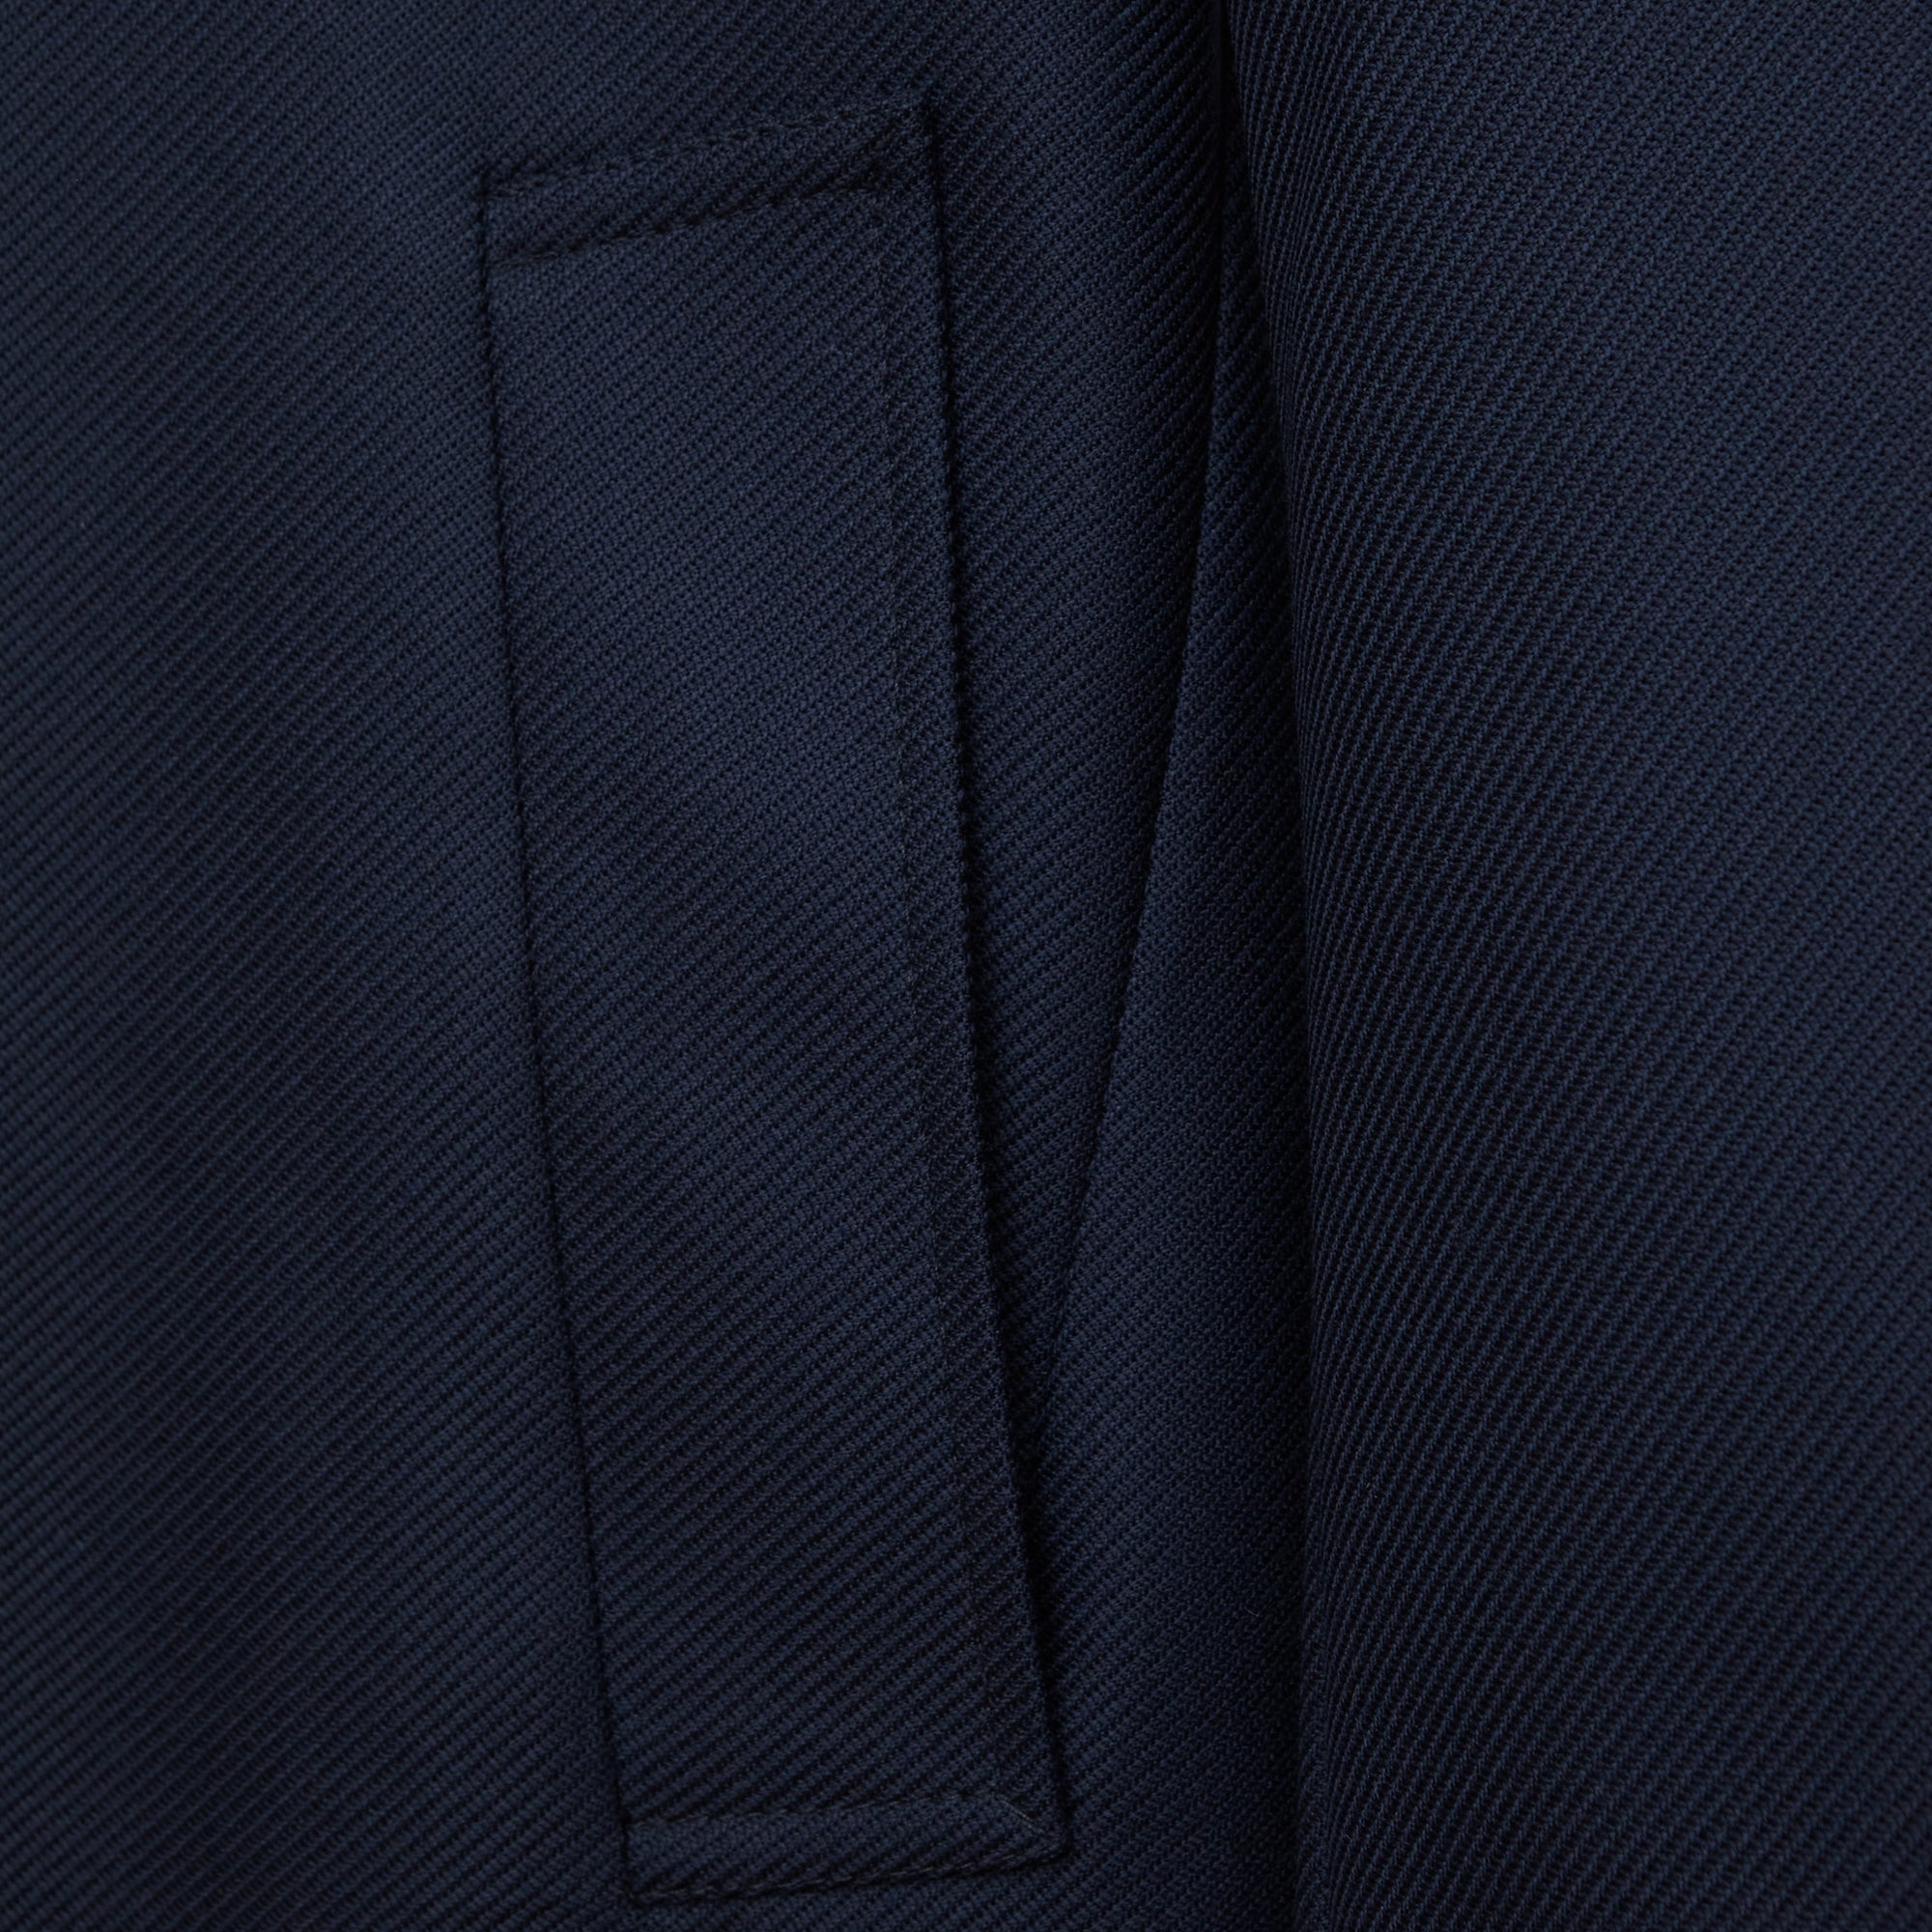 Midnight Navy Loro Piana Storm System Single-Breasted Car Coat With Liner